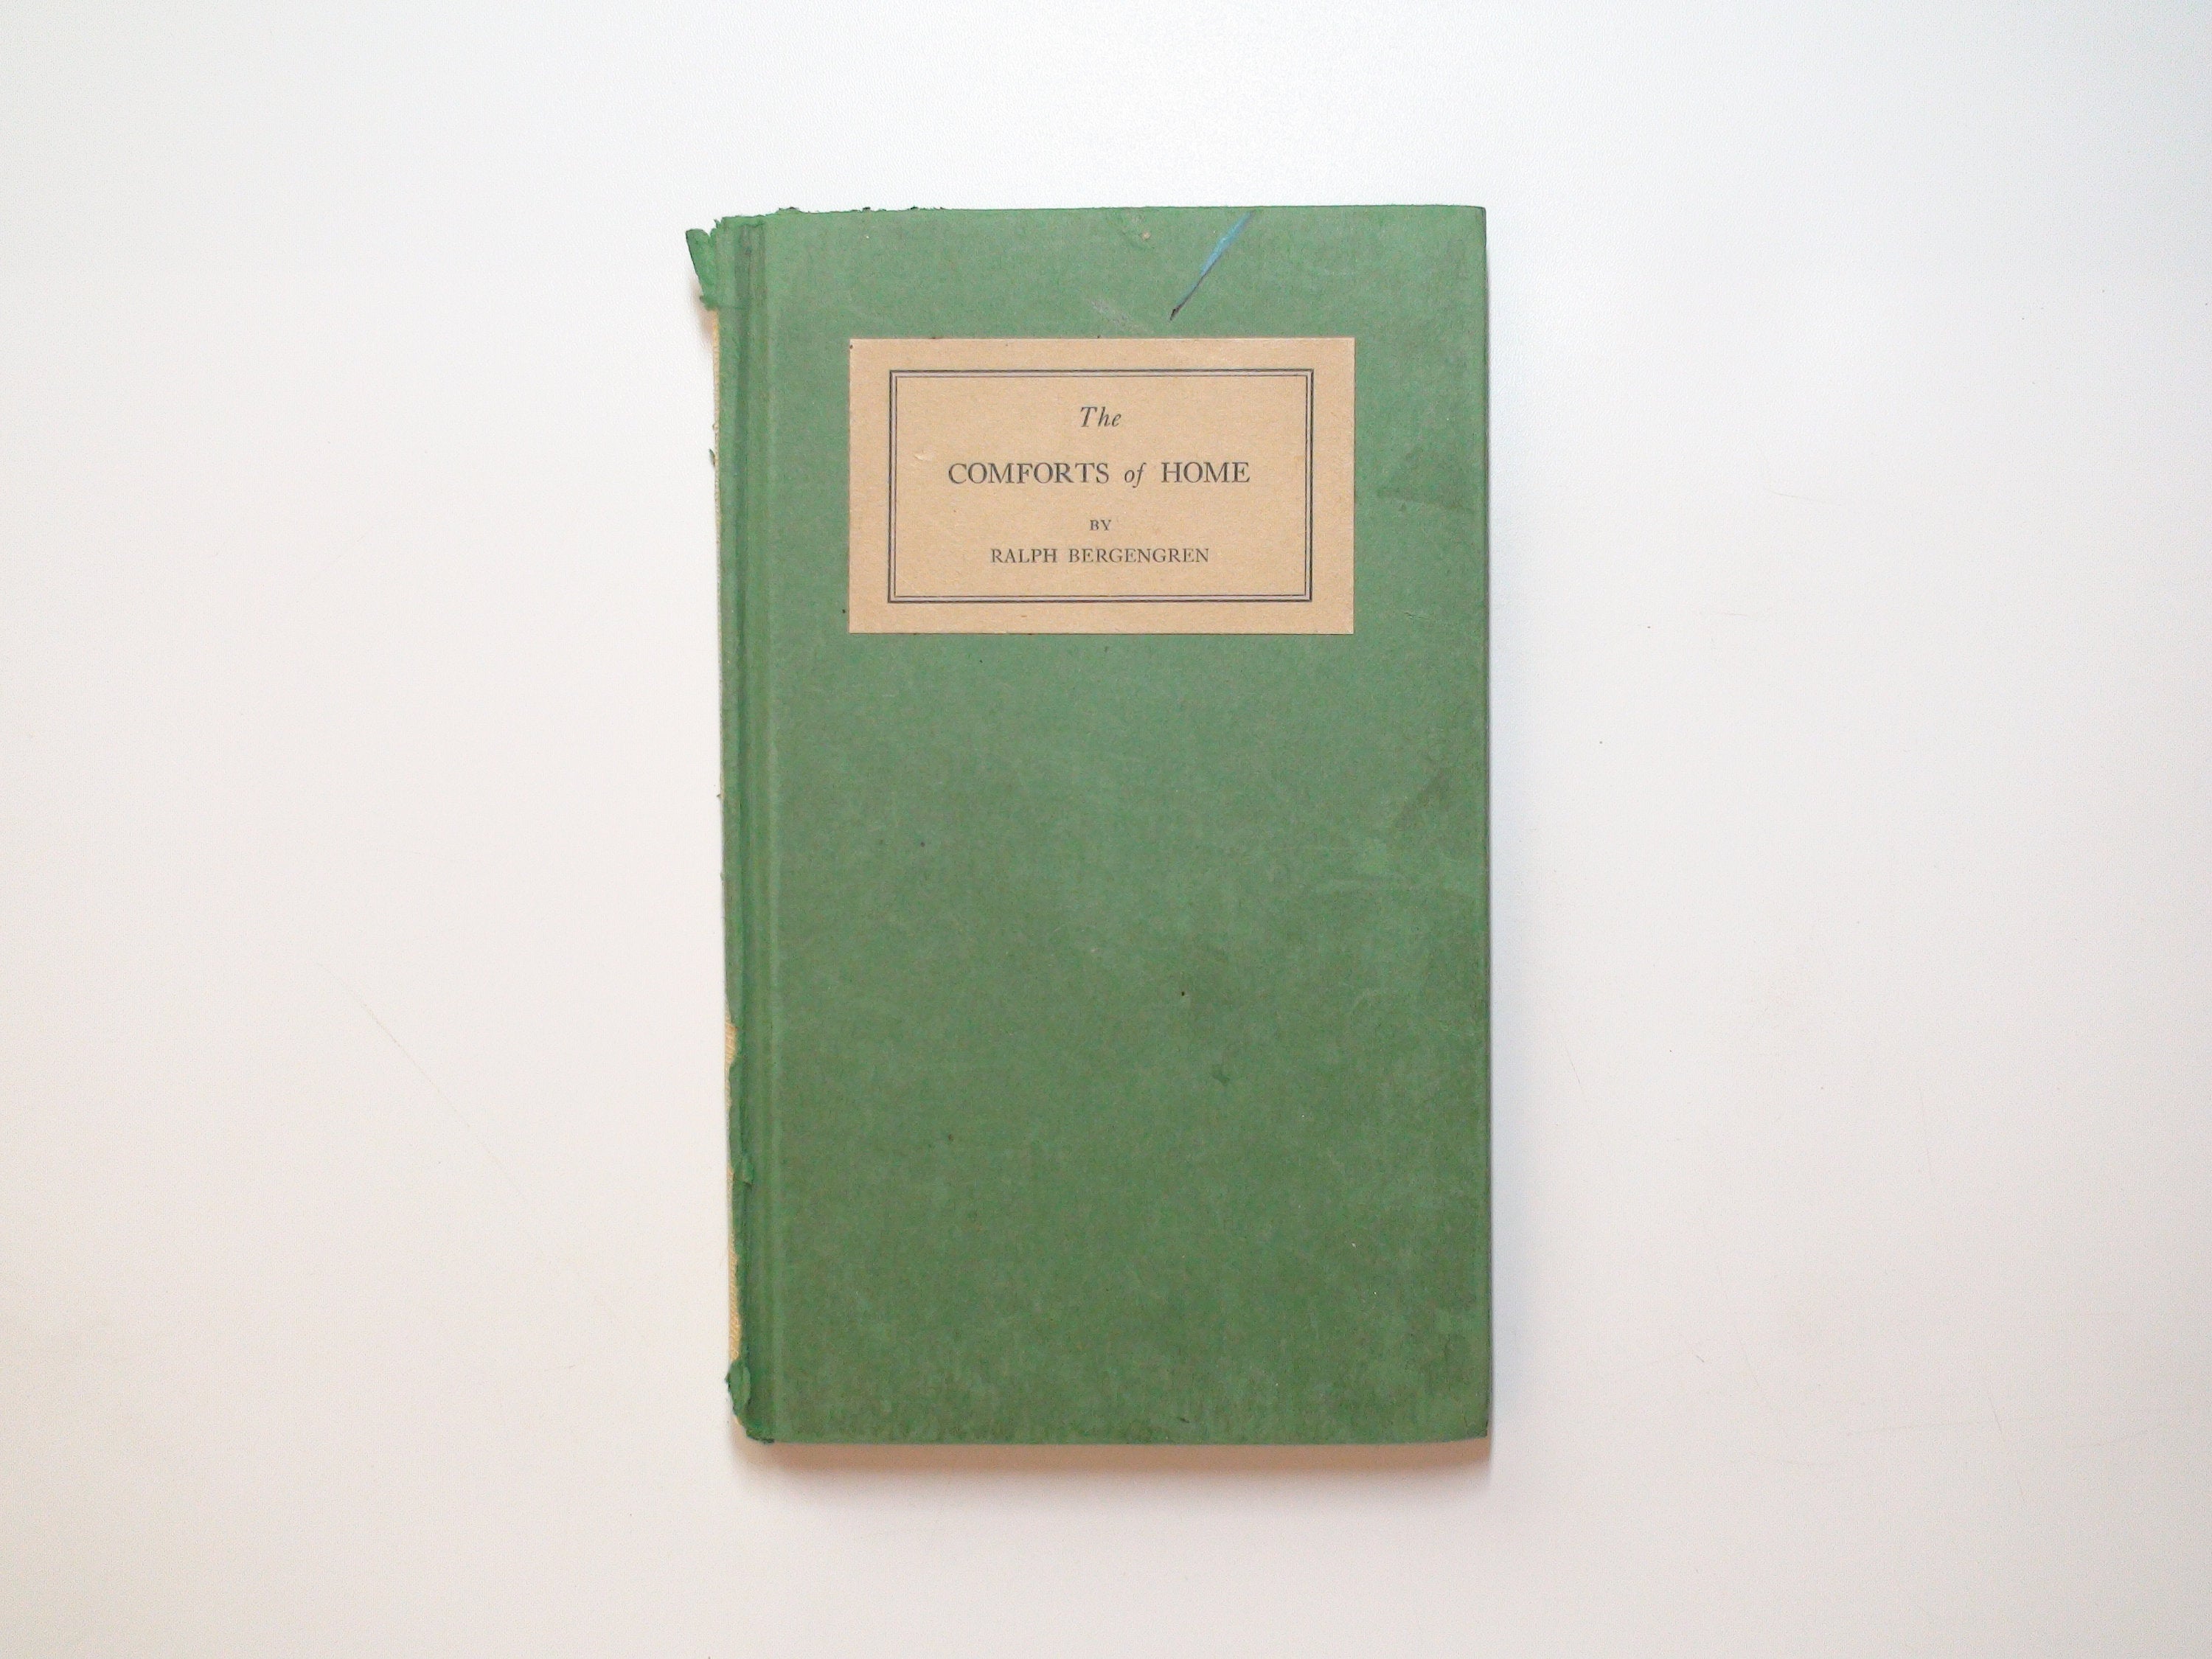 The Comforts of Home, Ralph Bergengren, 1st Ed, 1918